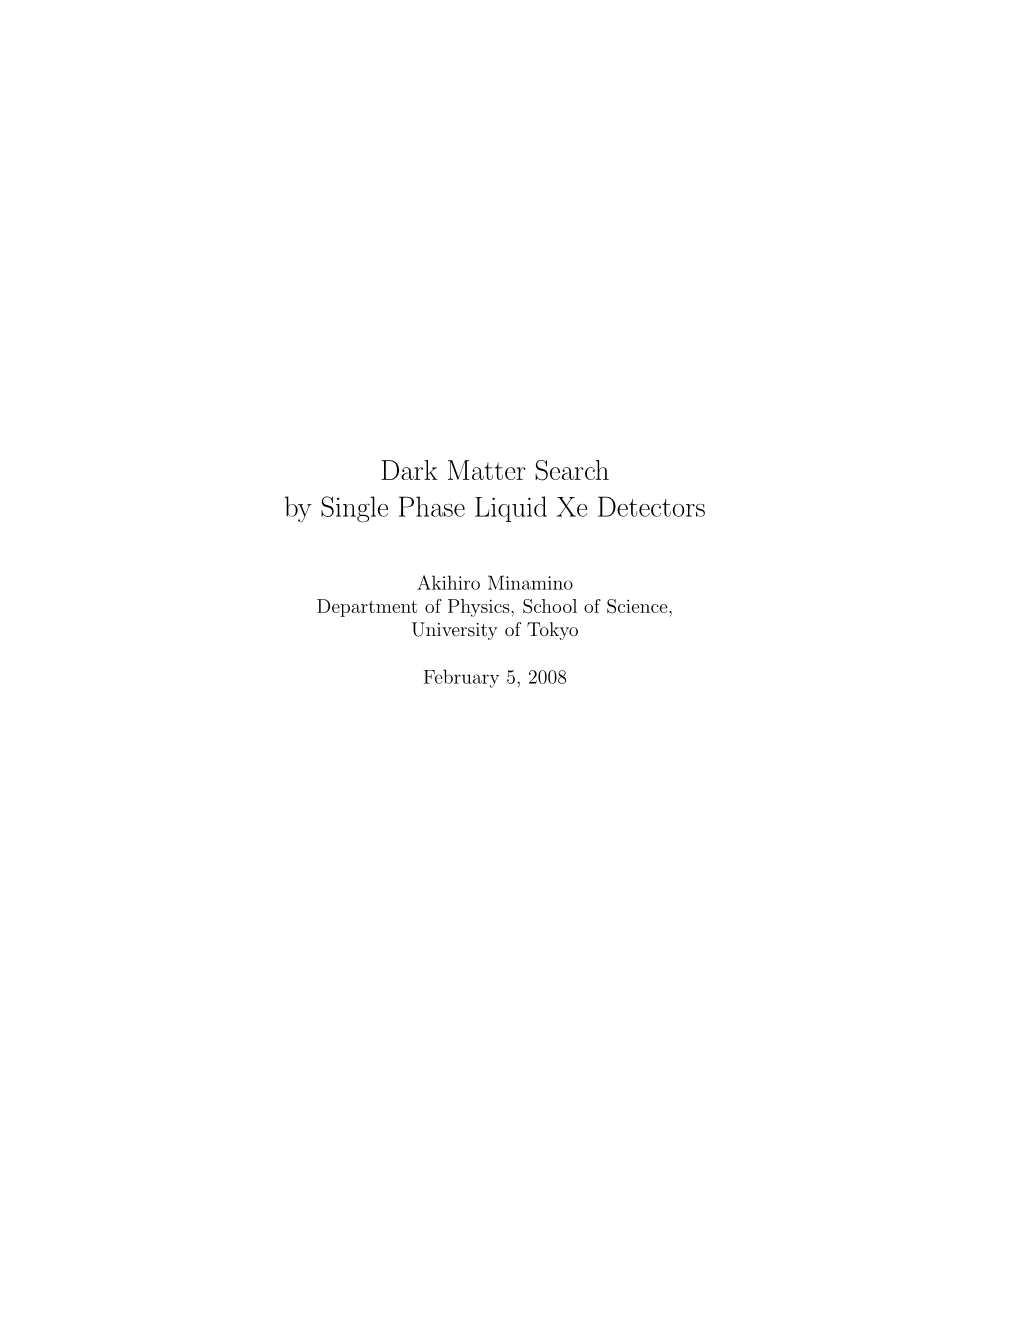 Dark Matter Search by Single Phase Liquid Xe Detectors